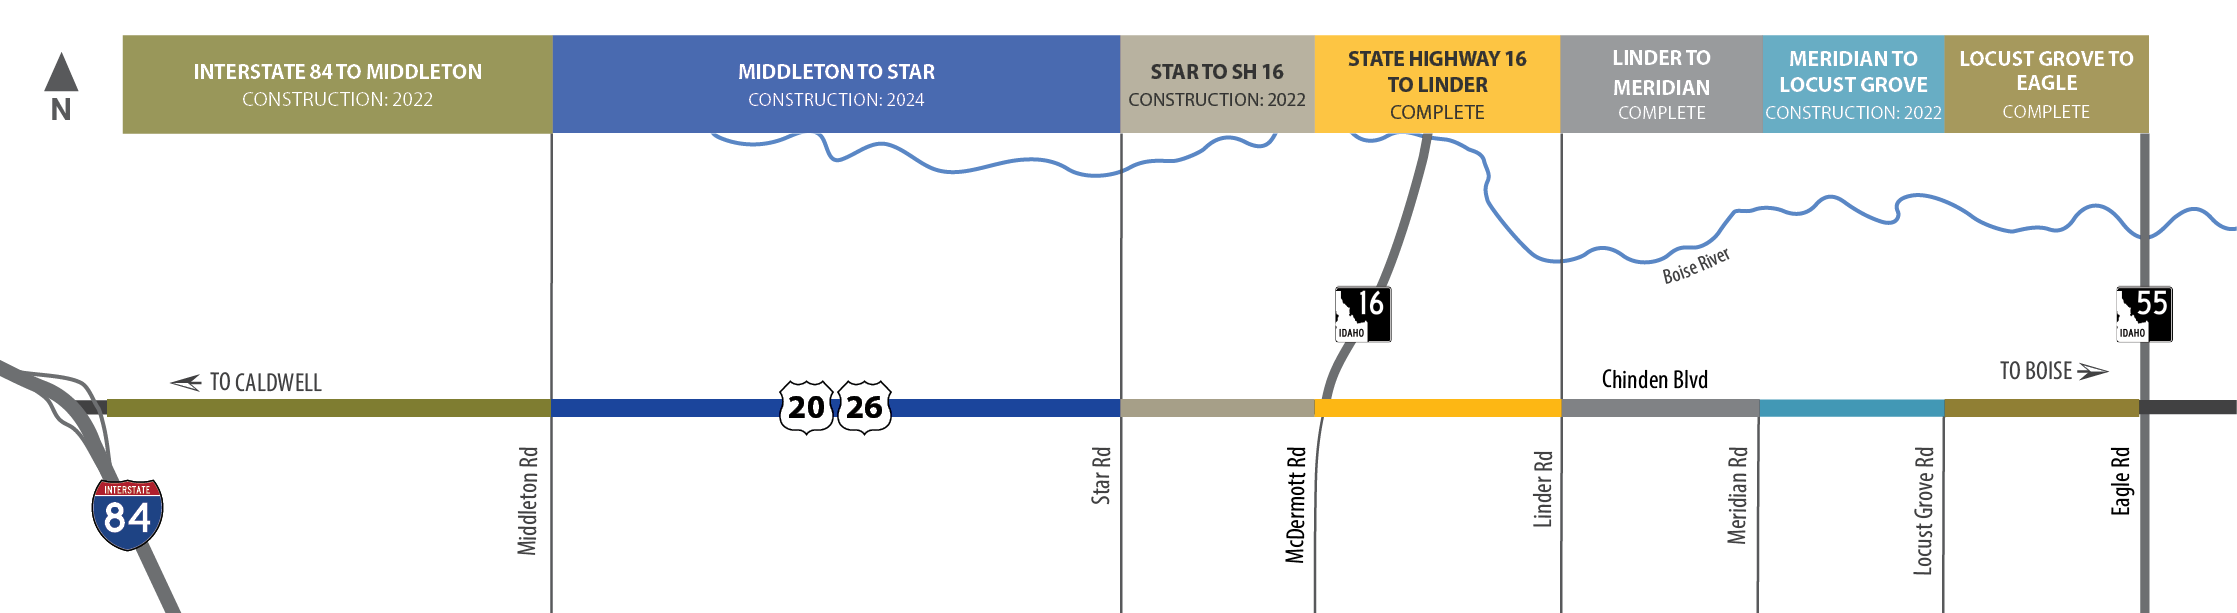 Combined project area map and construction schedule including construction area between U.S. 20/26: I-84 to Middleton Road in Caldwell. This schedule highlights interstate 84 to Middleton to be constructed in 2022